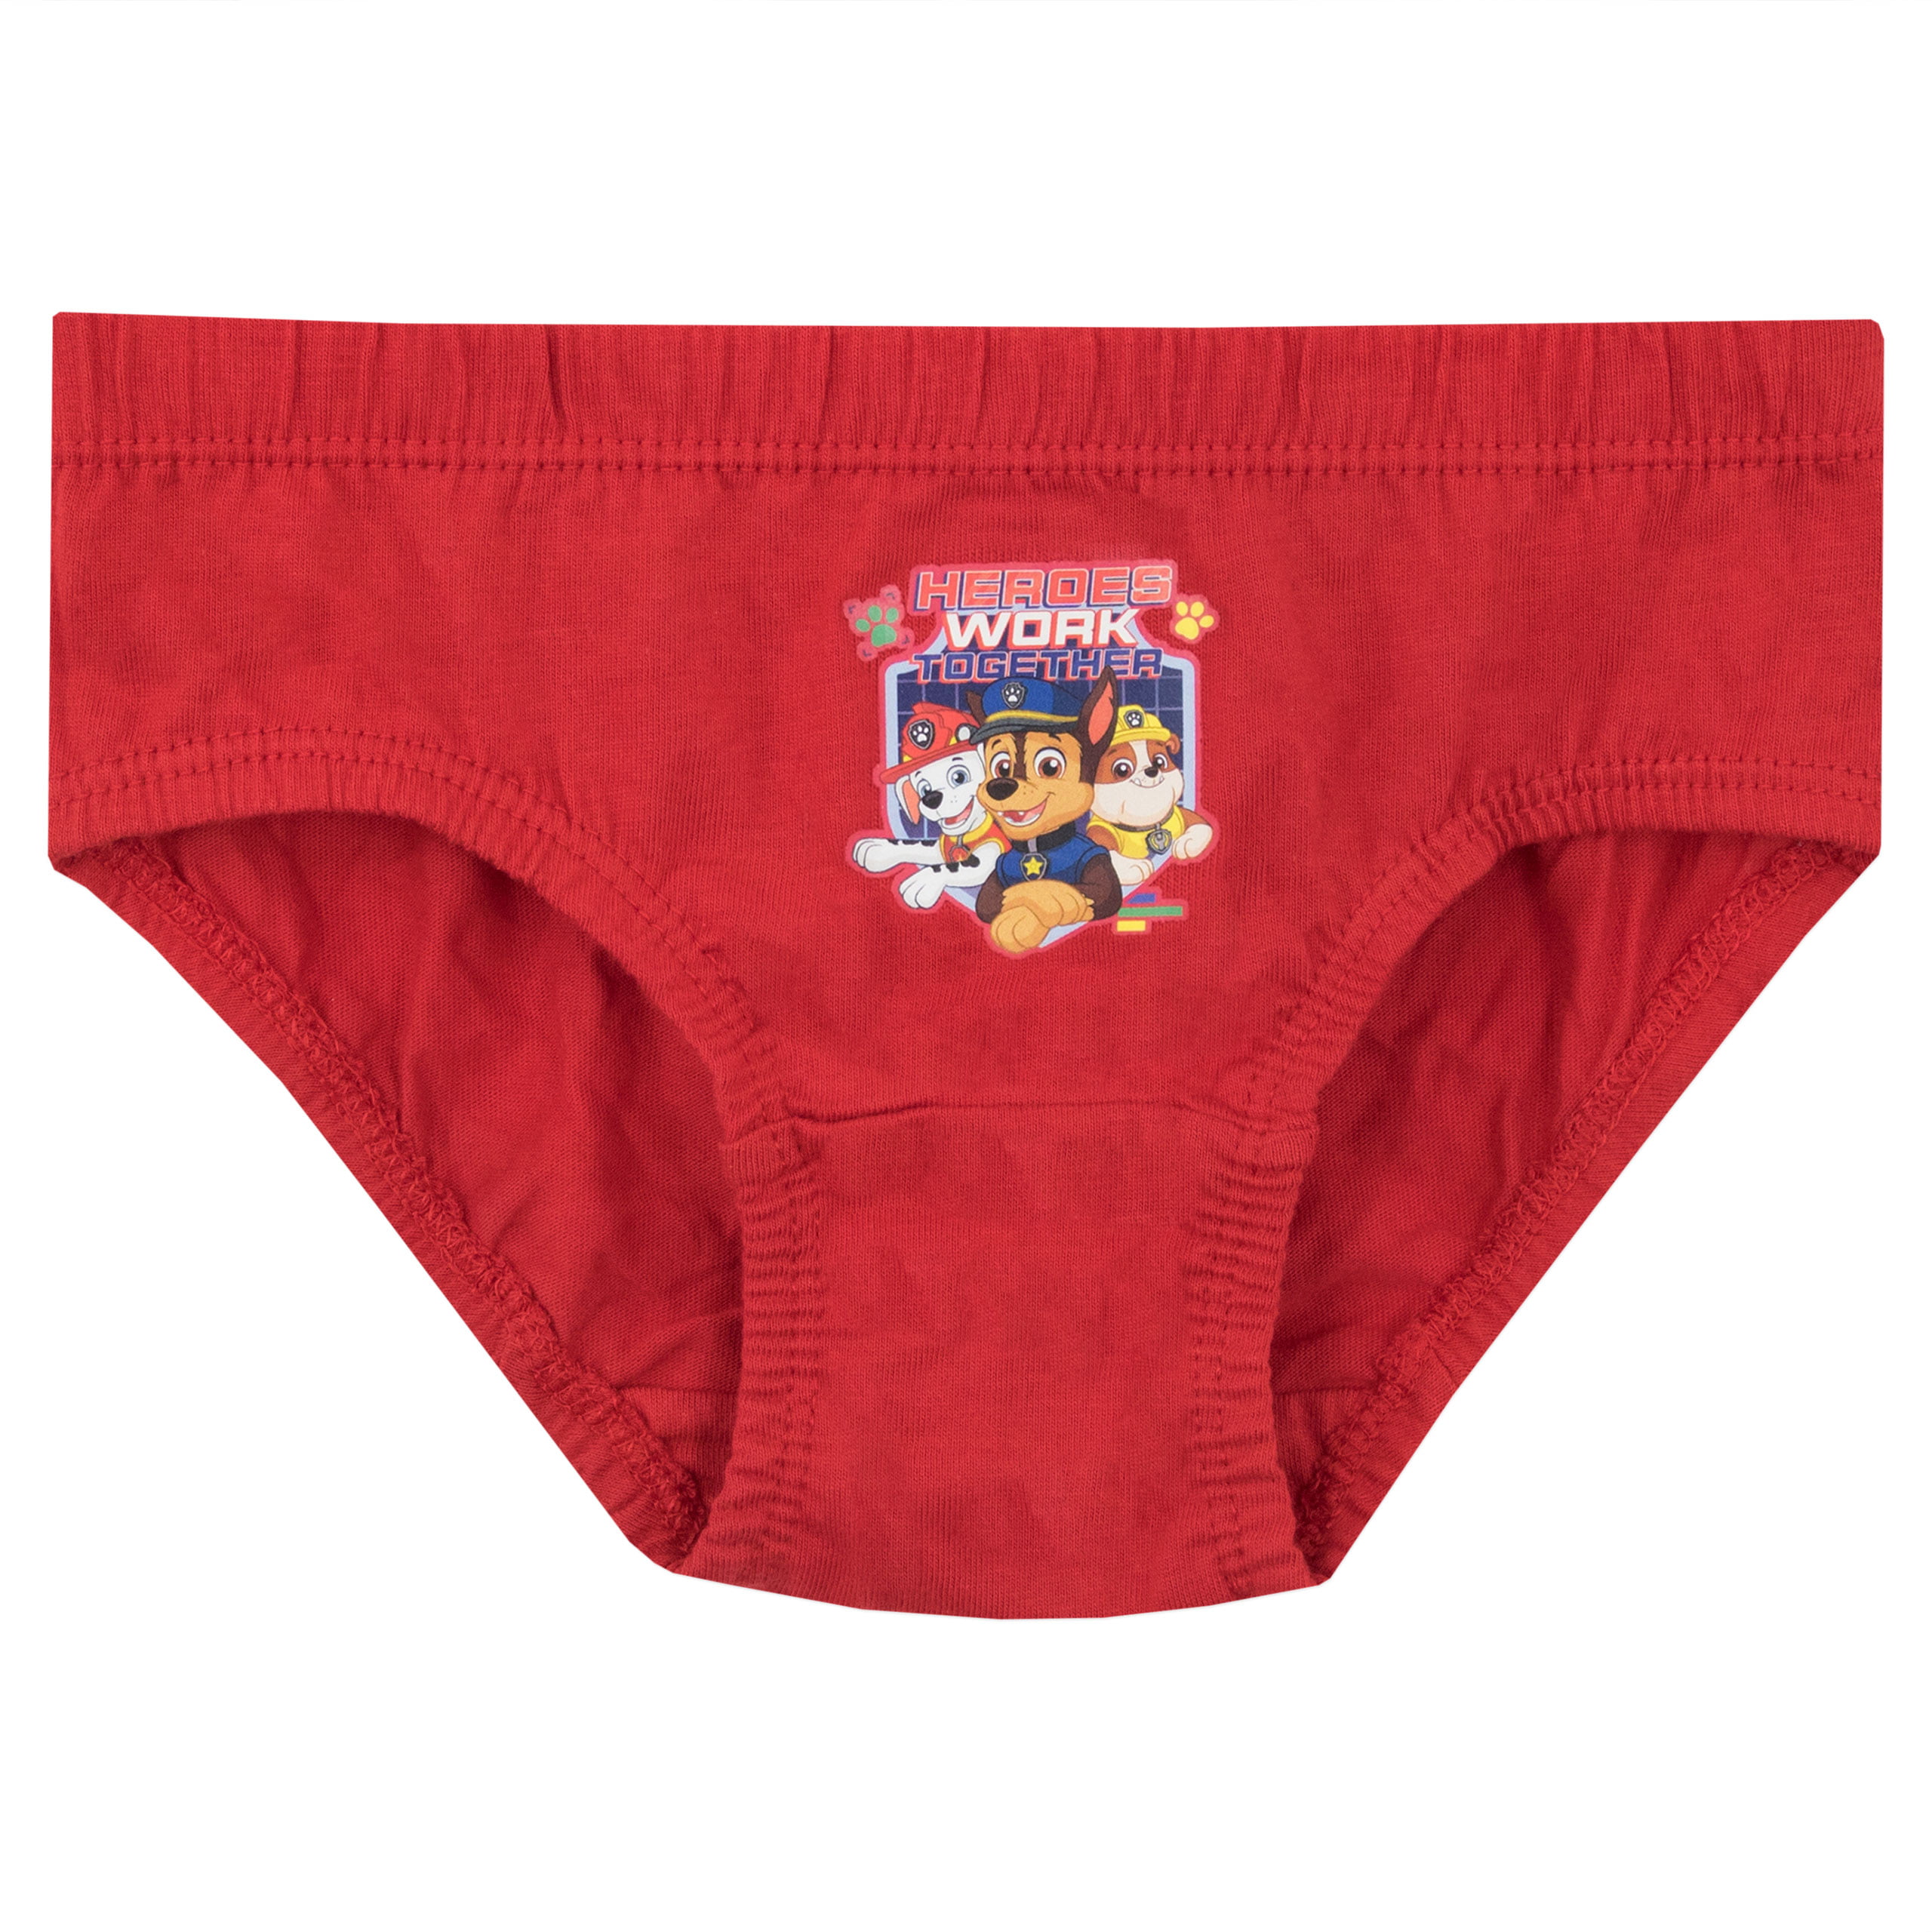 TODDLER SIZE 4T NICKELODEAN PAW PATROL BRIEFS--3 PAIR--NEW W/O TAGS 12-4-7